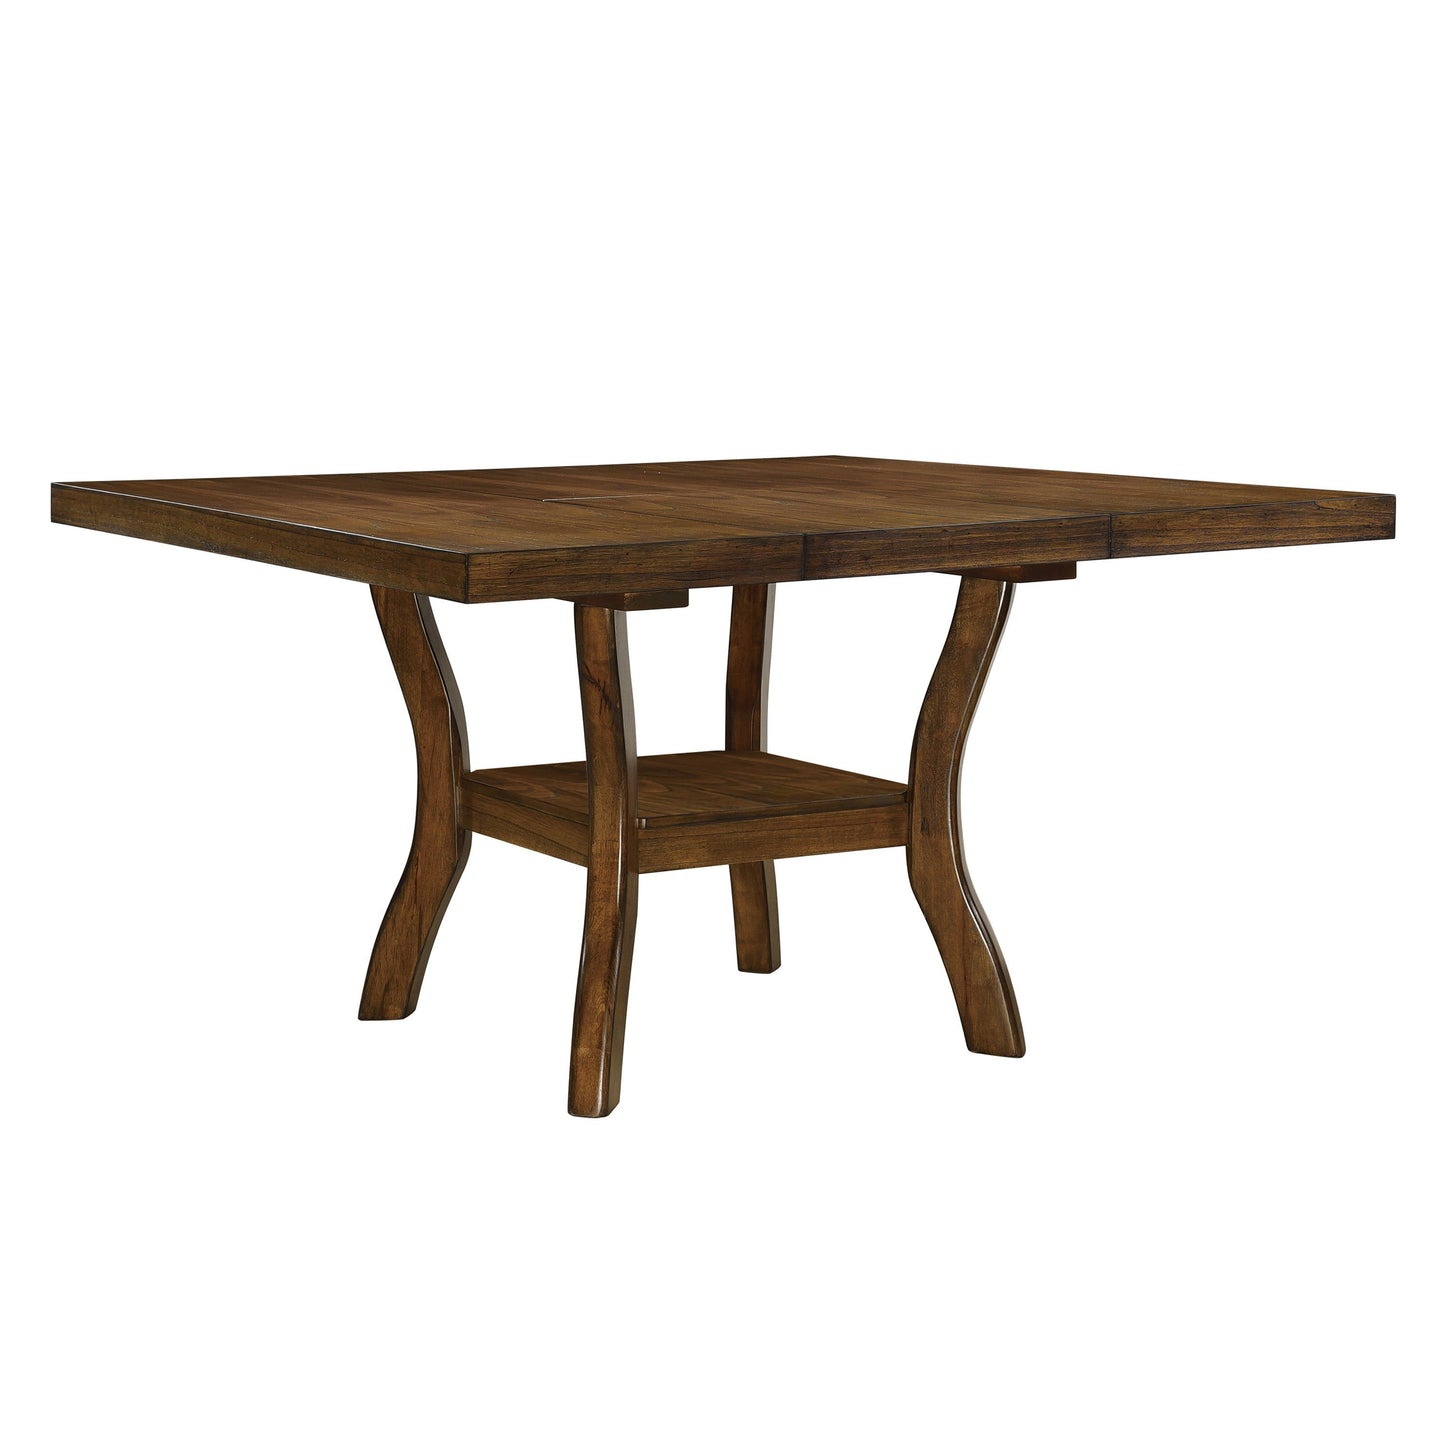 Darla Brown Extendable Dining Set